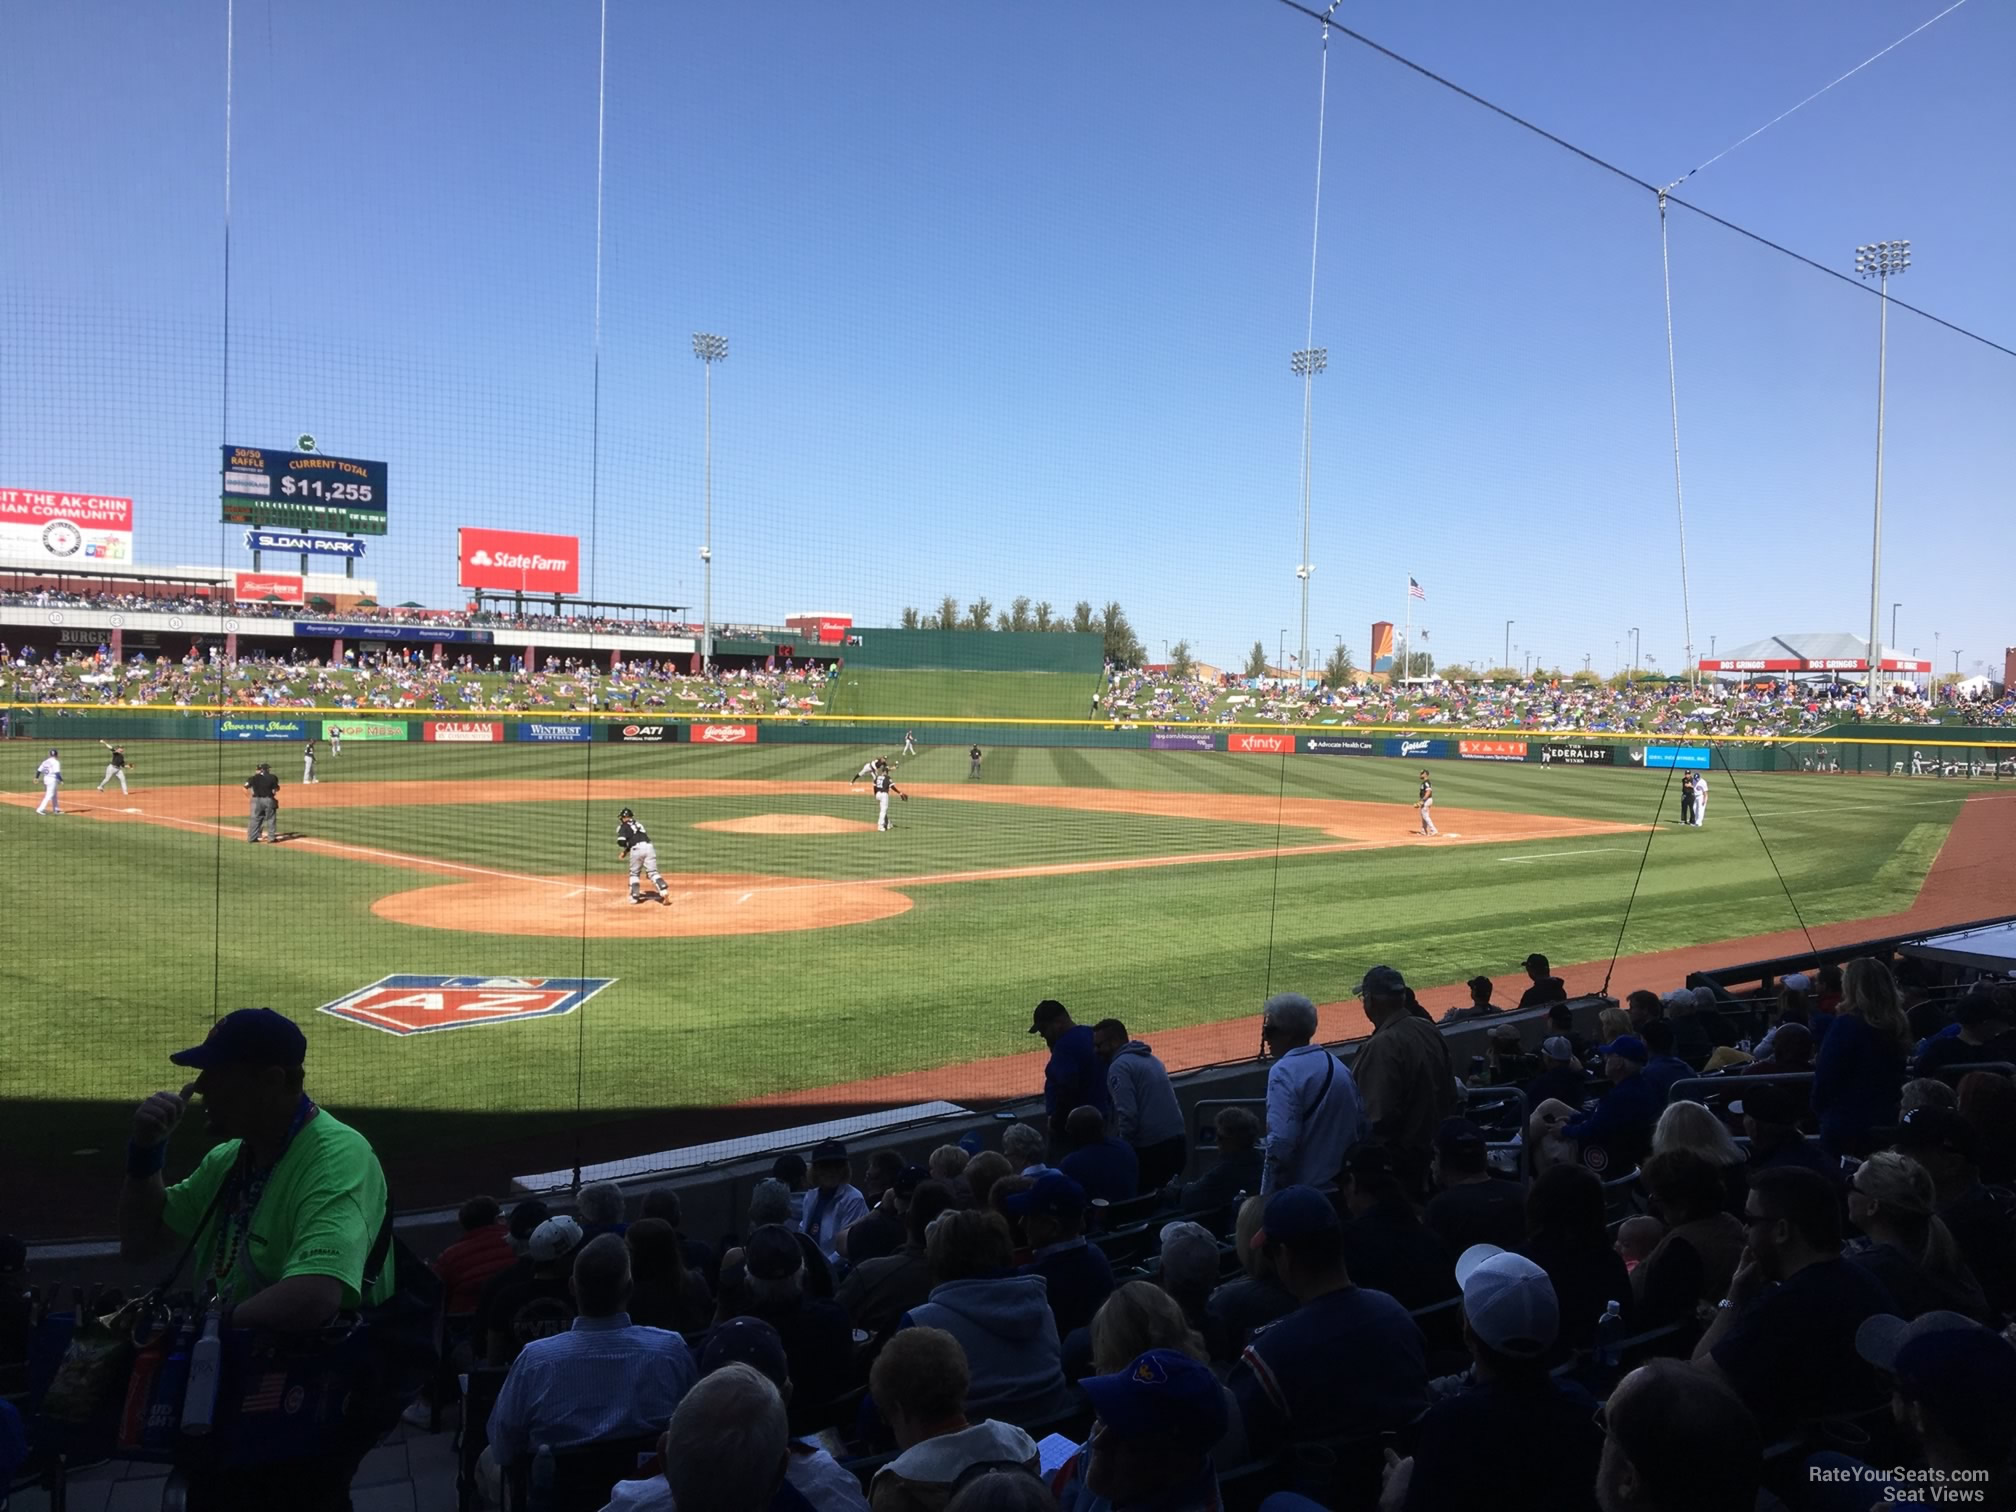 section 112, row 12 seat view  - sloan park